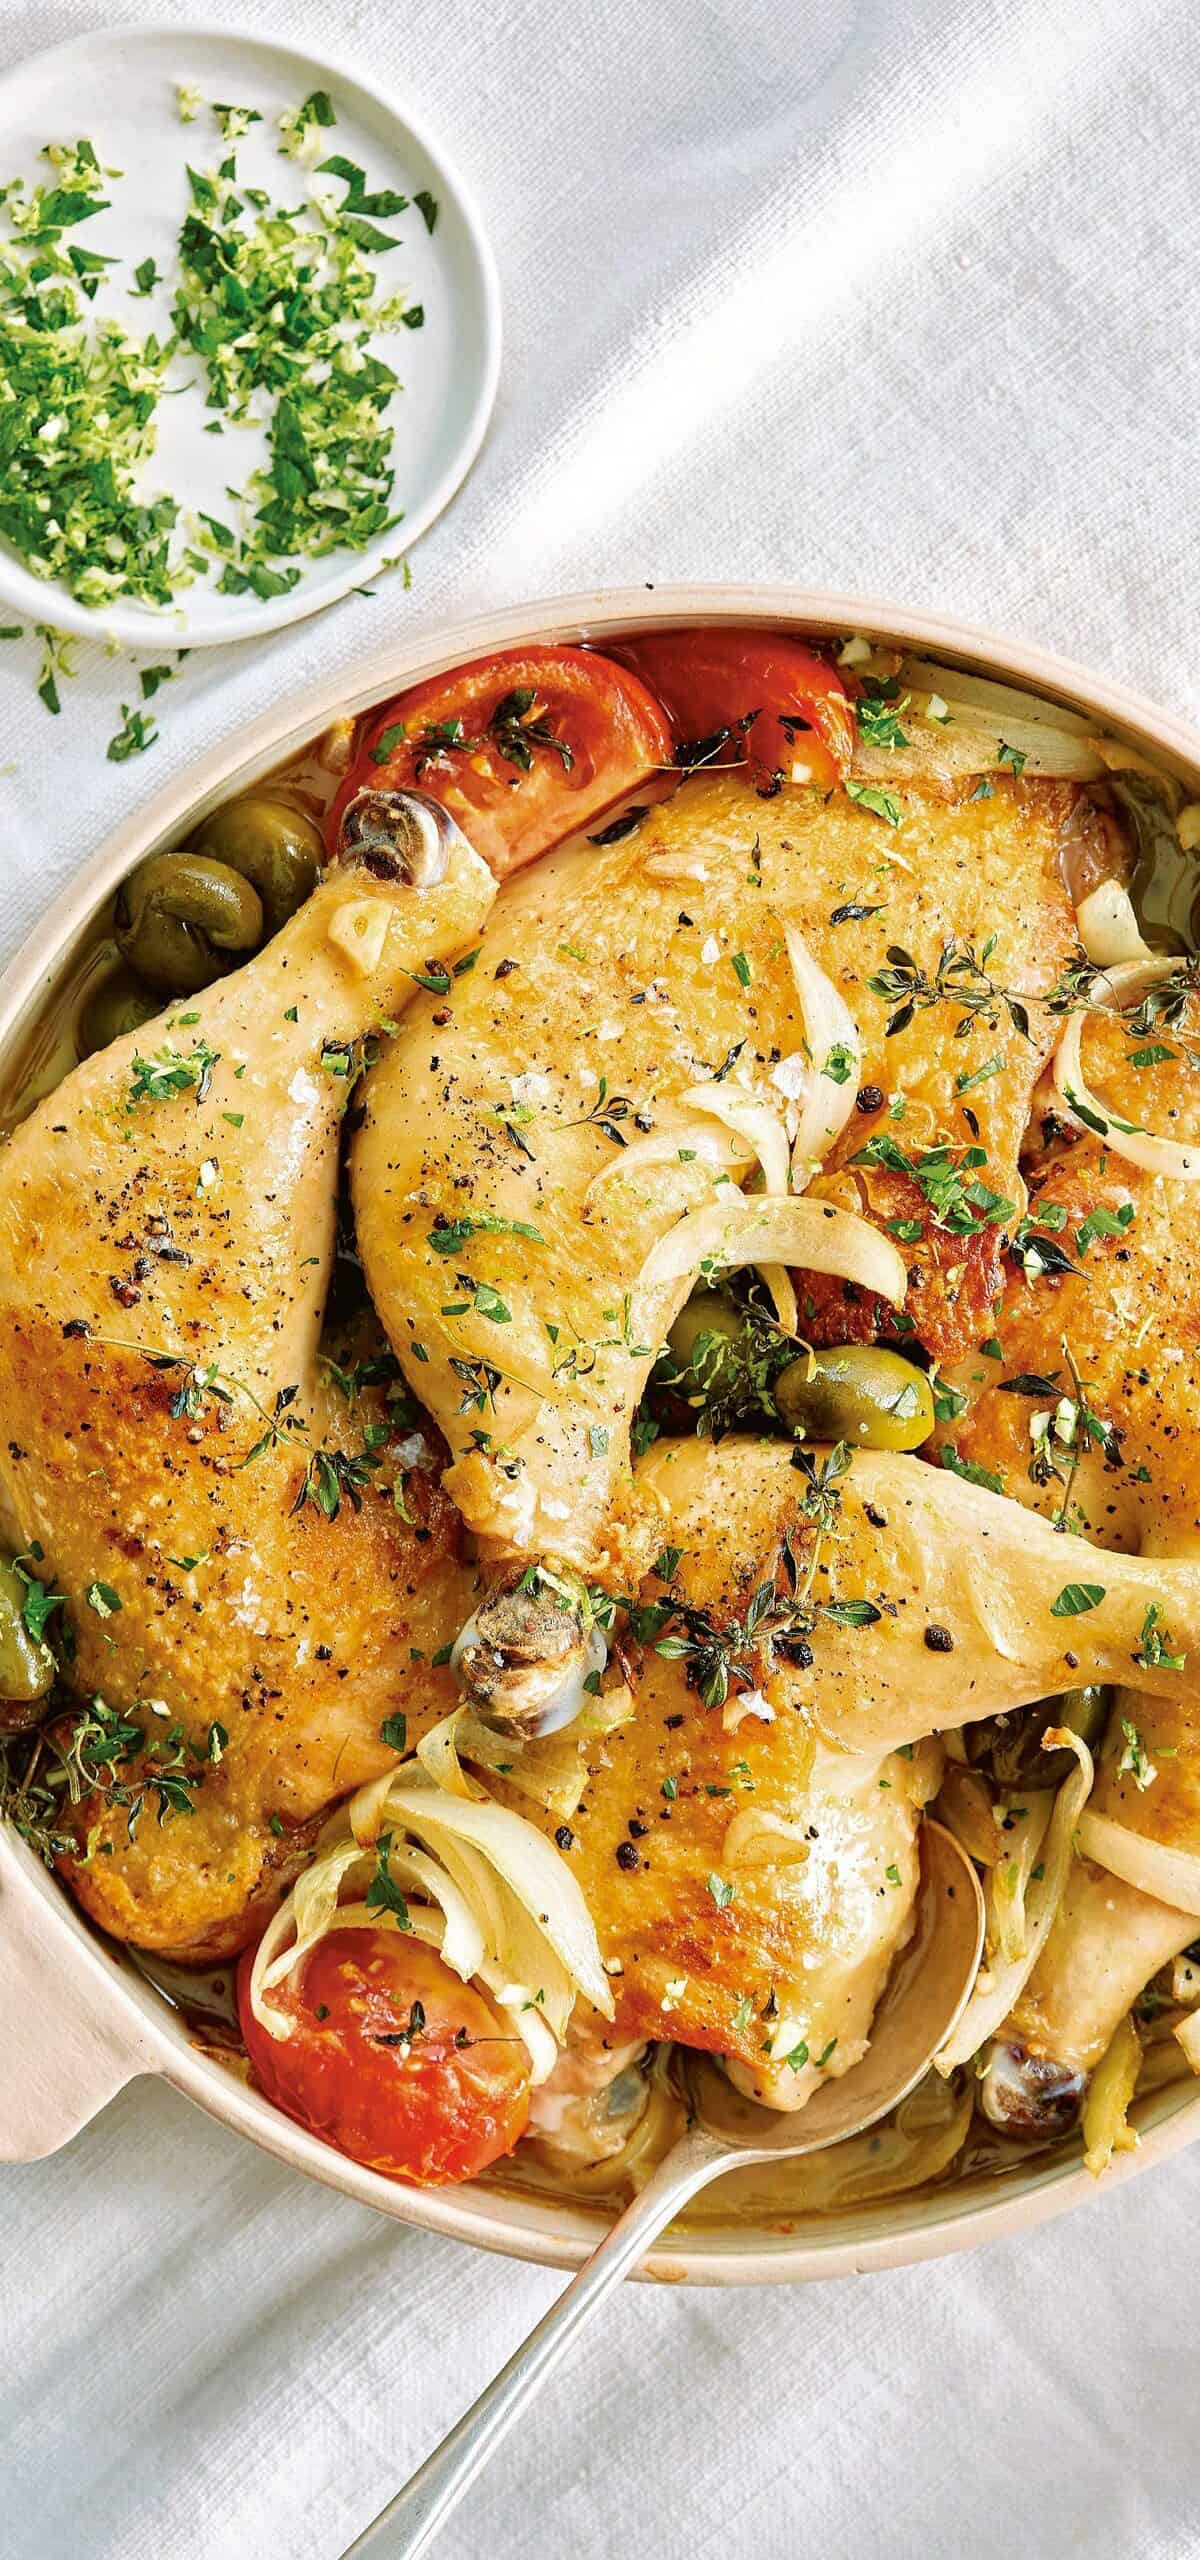  Lemon-infused chicken that is truly decadent.